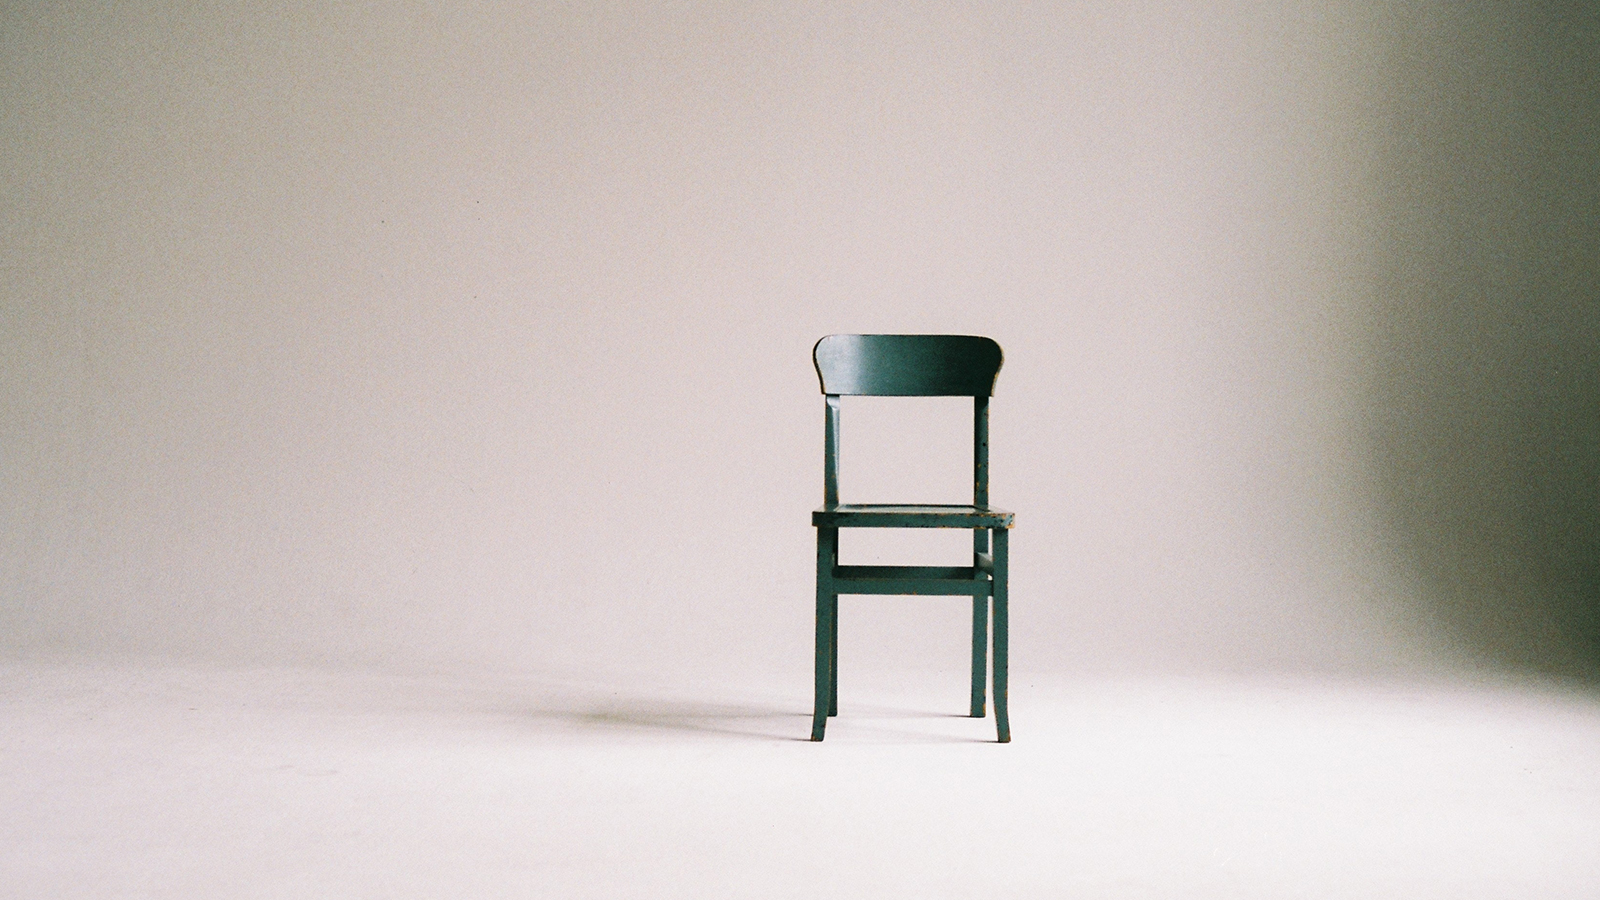 Chair in empty room